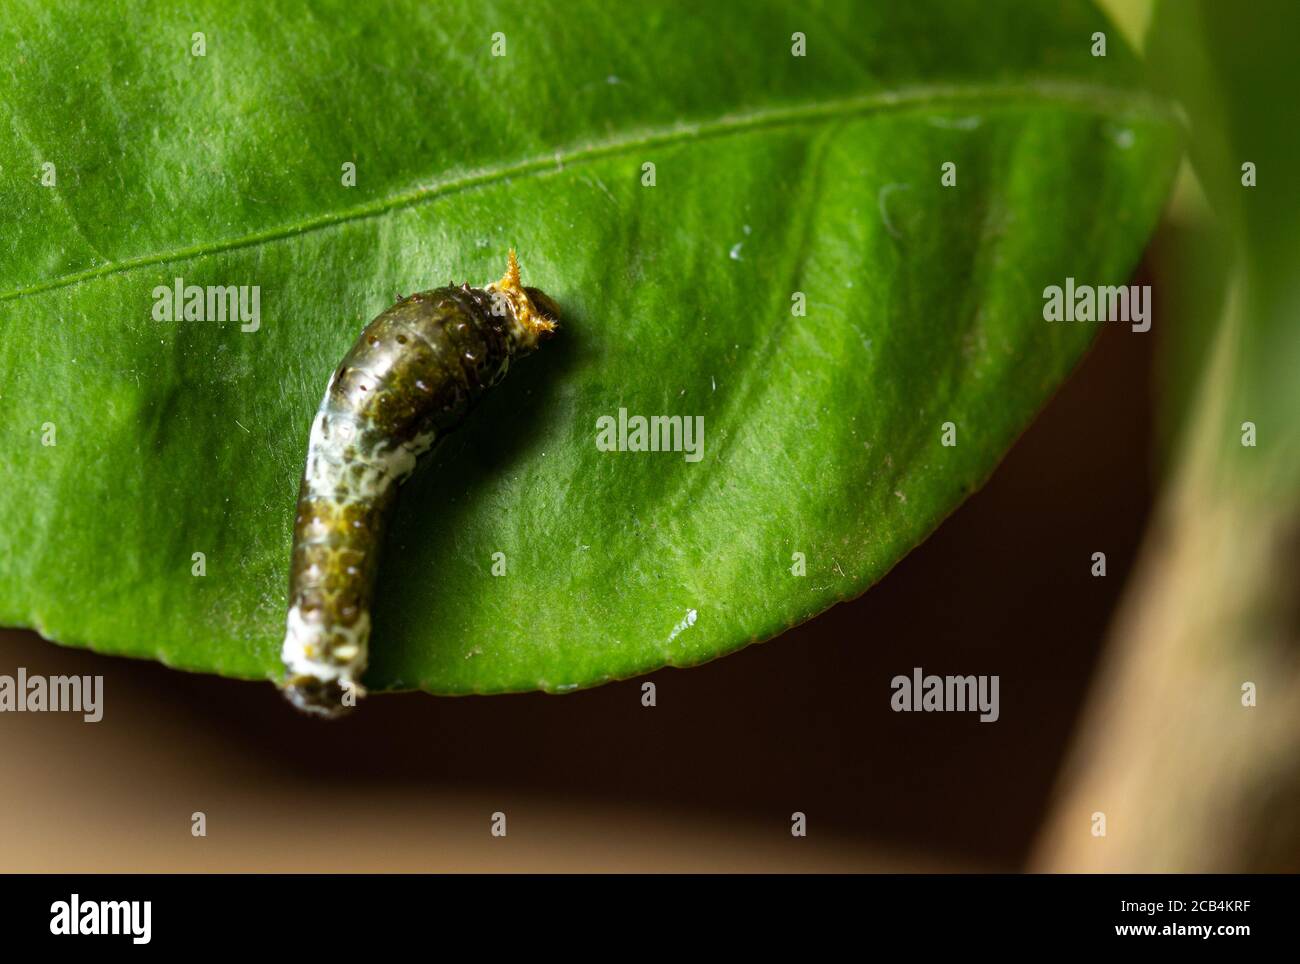 Citrus caterpillar relaxing on leaf also known as lemon tree caterpillar Stock Photo